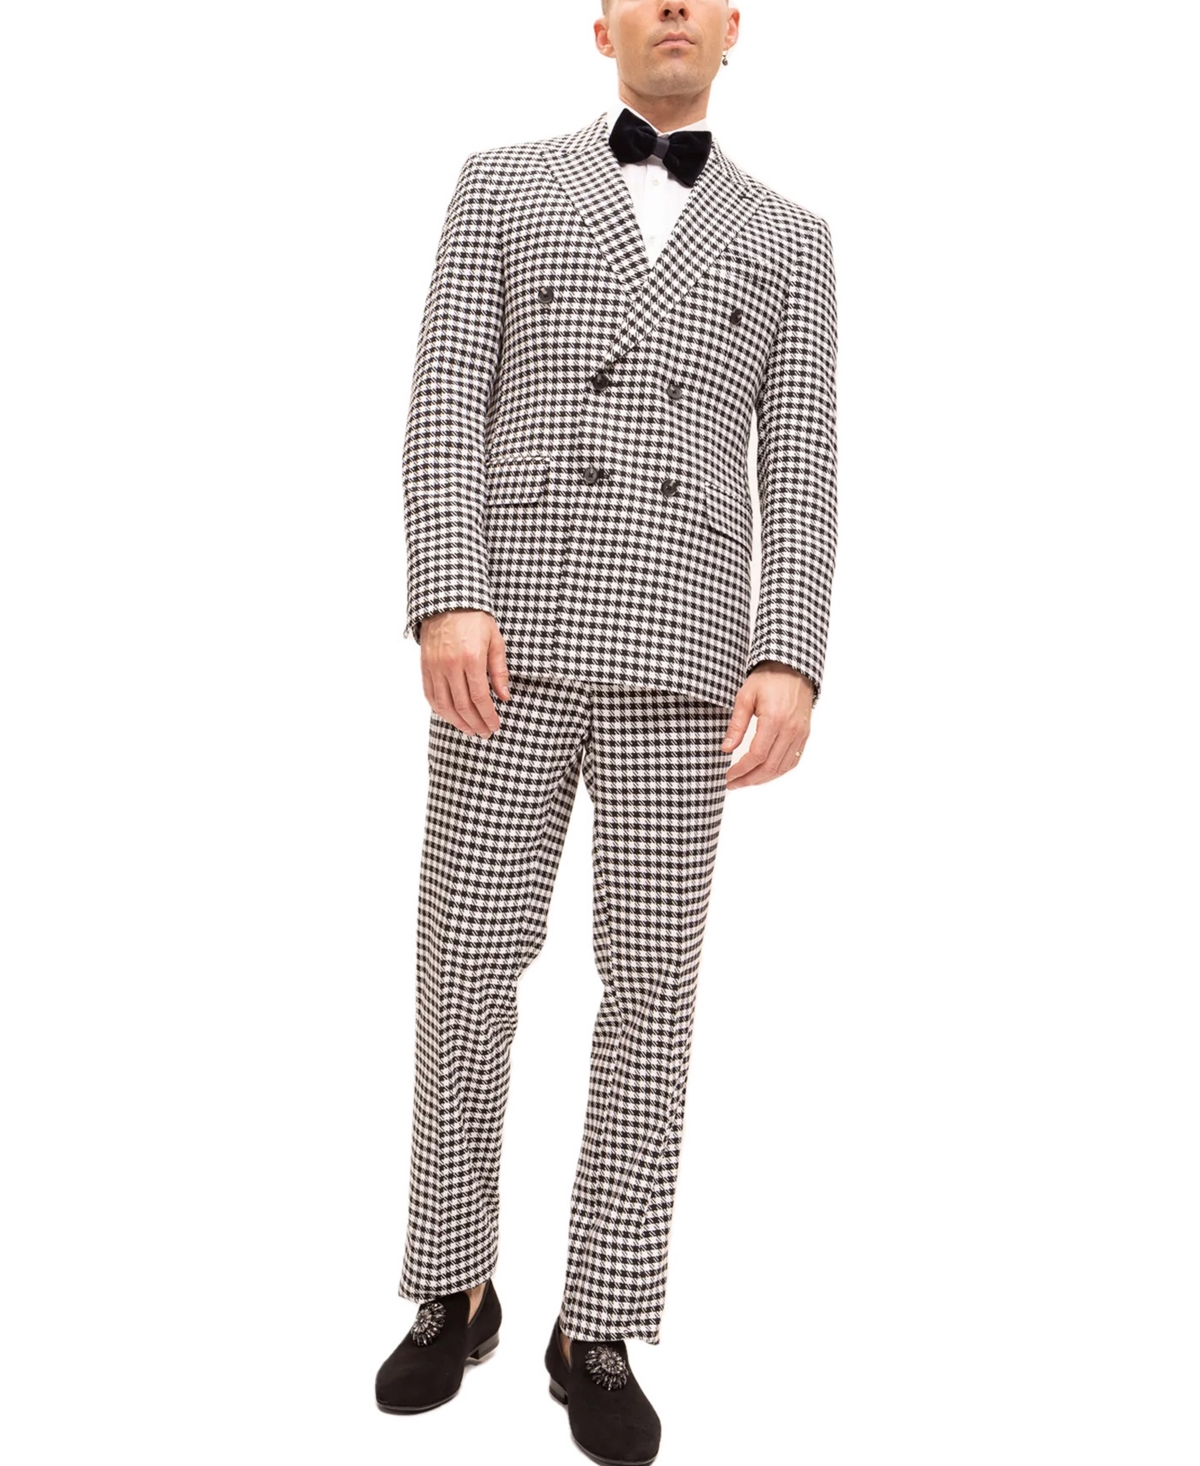 Men's Modern Double Breasted, 2-Piece Suit Set - Black White